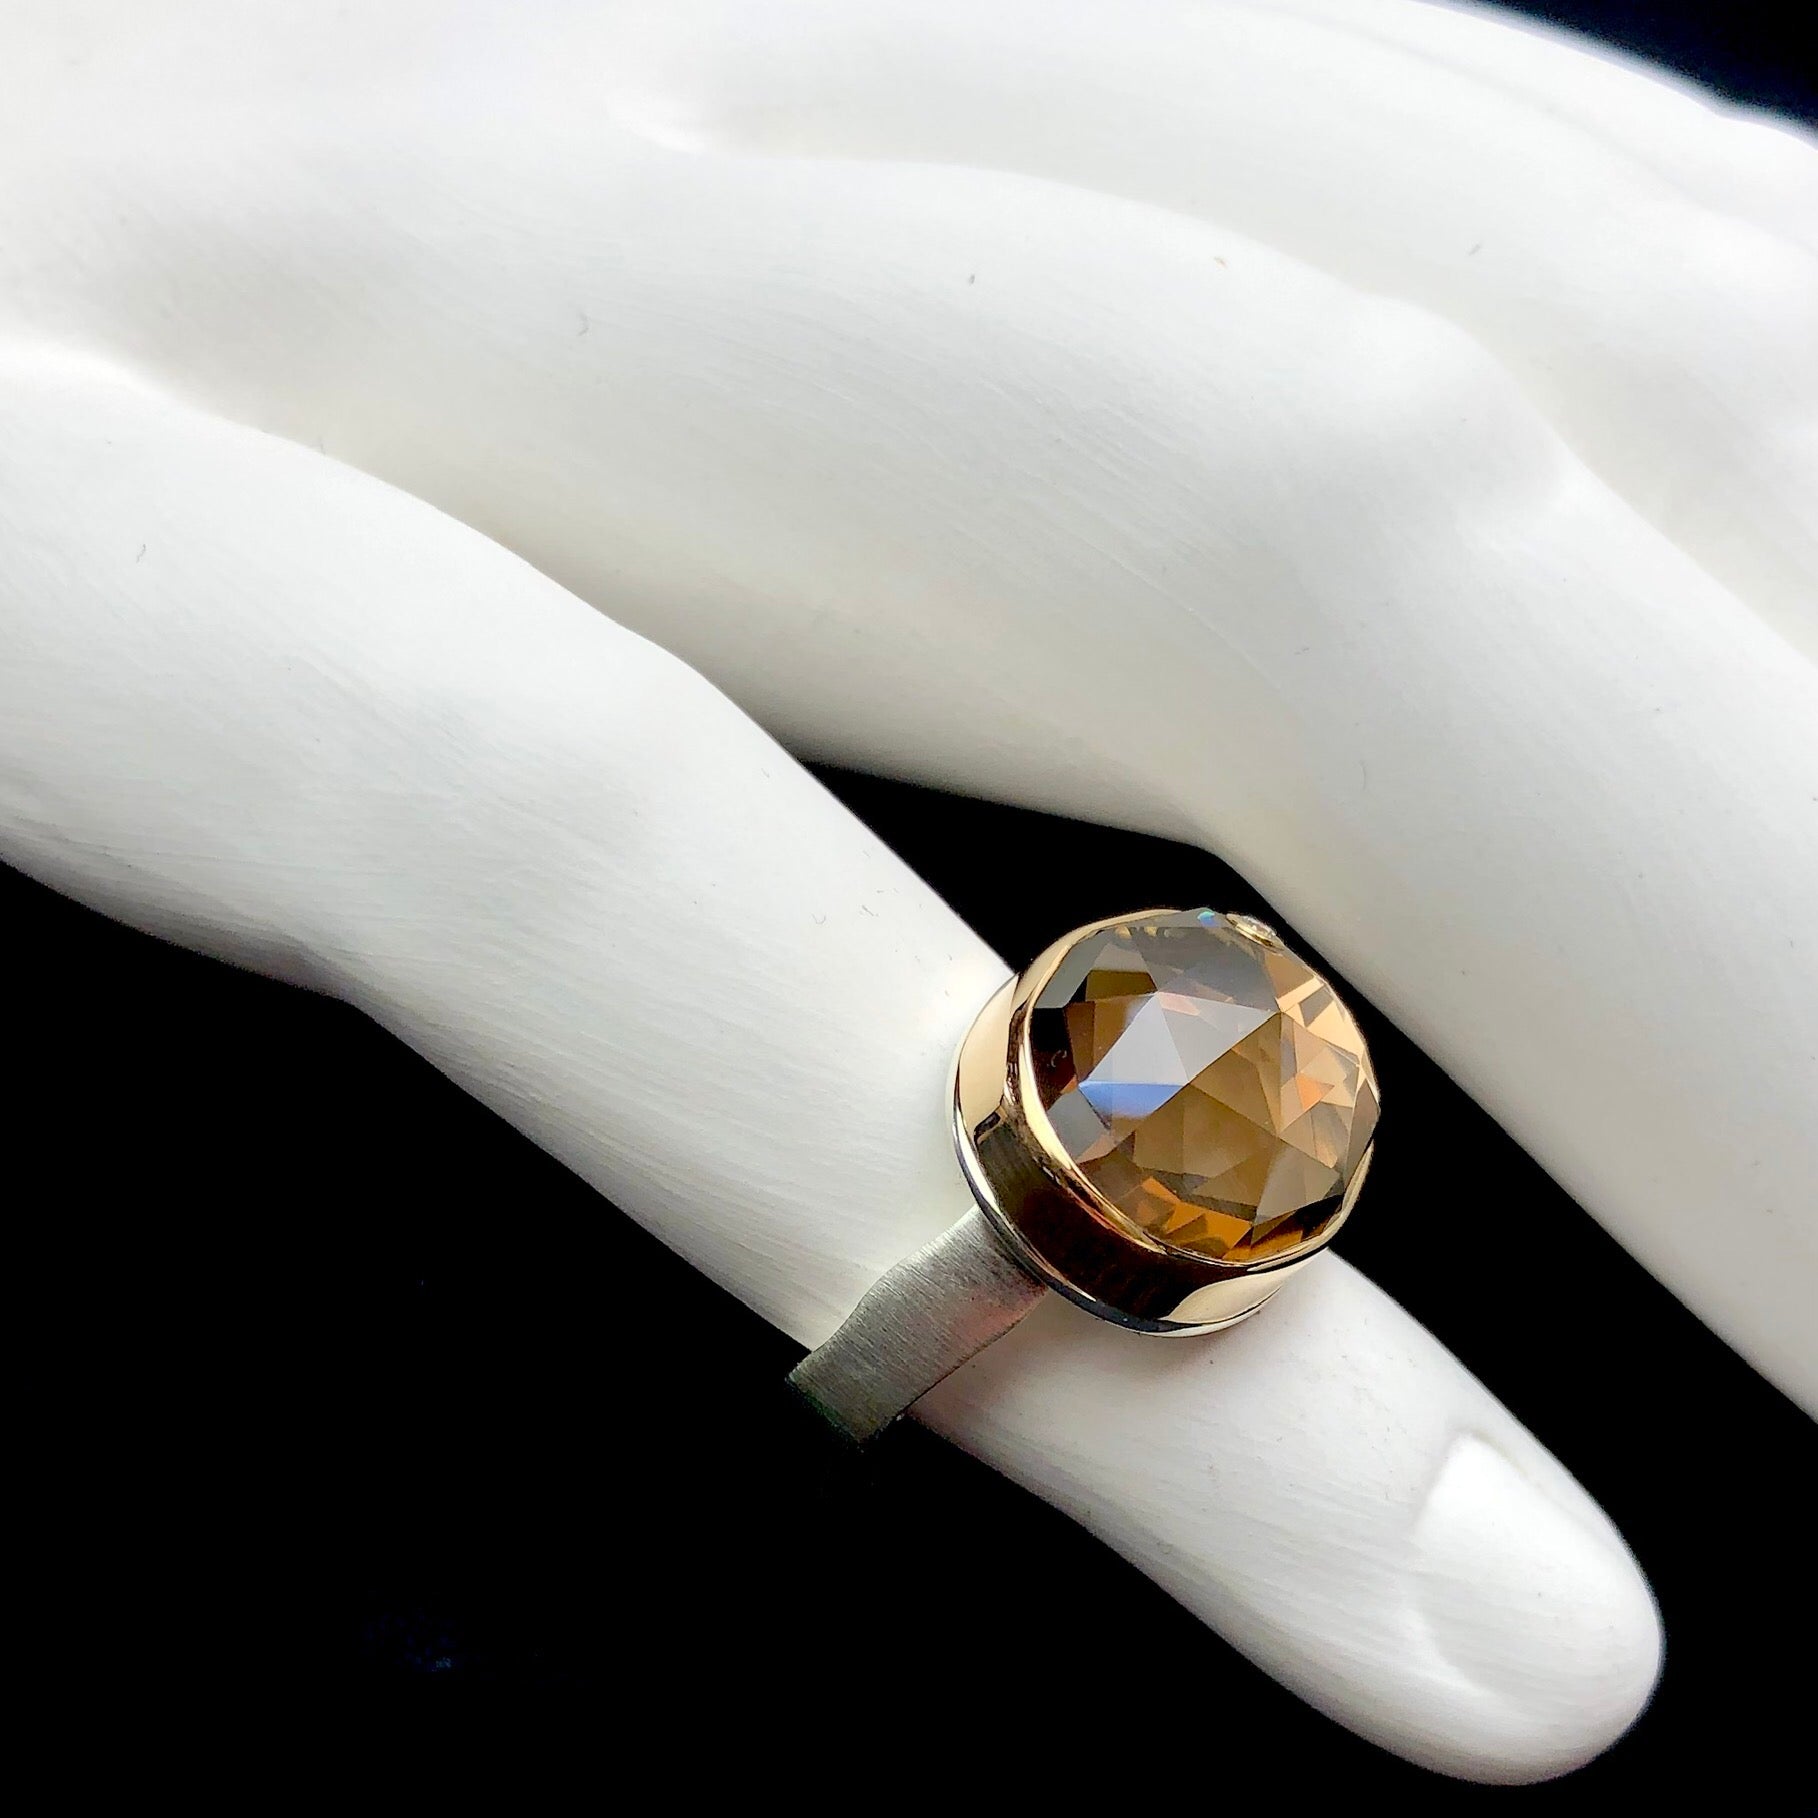 Side profile view of smokey quartz ring with comfort band on white ceramic finger